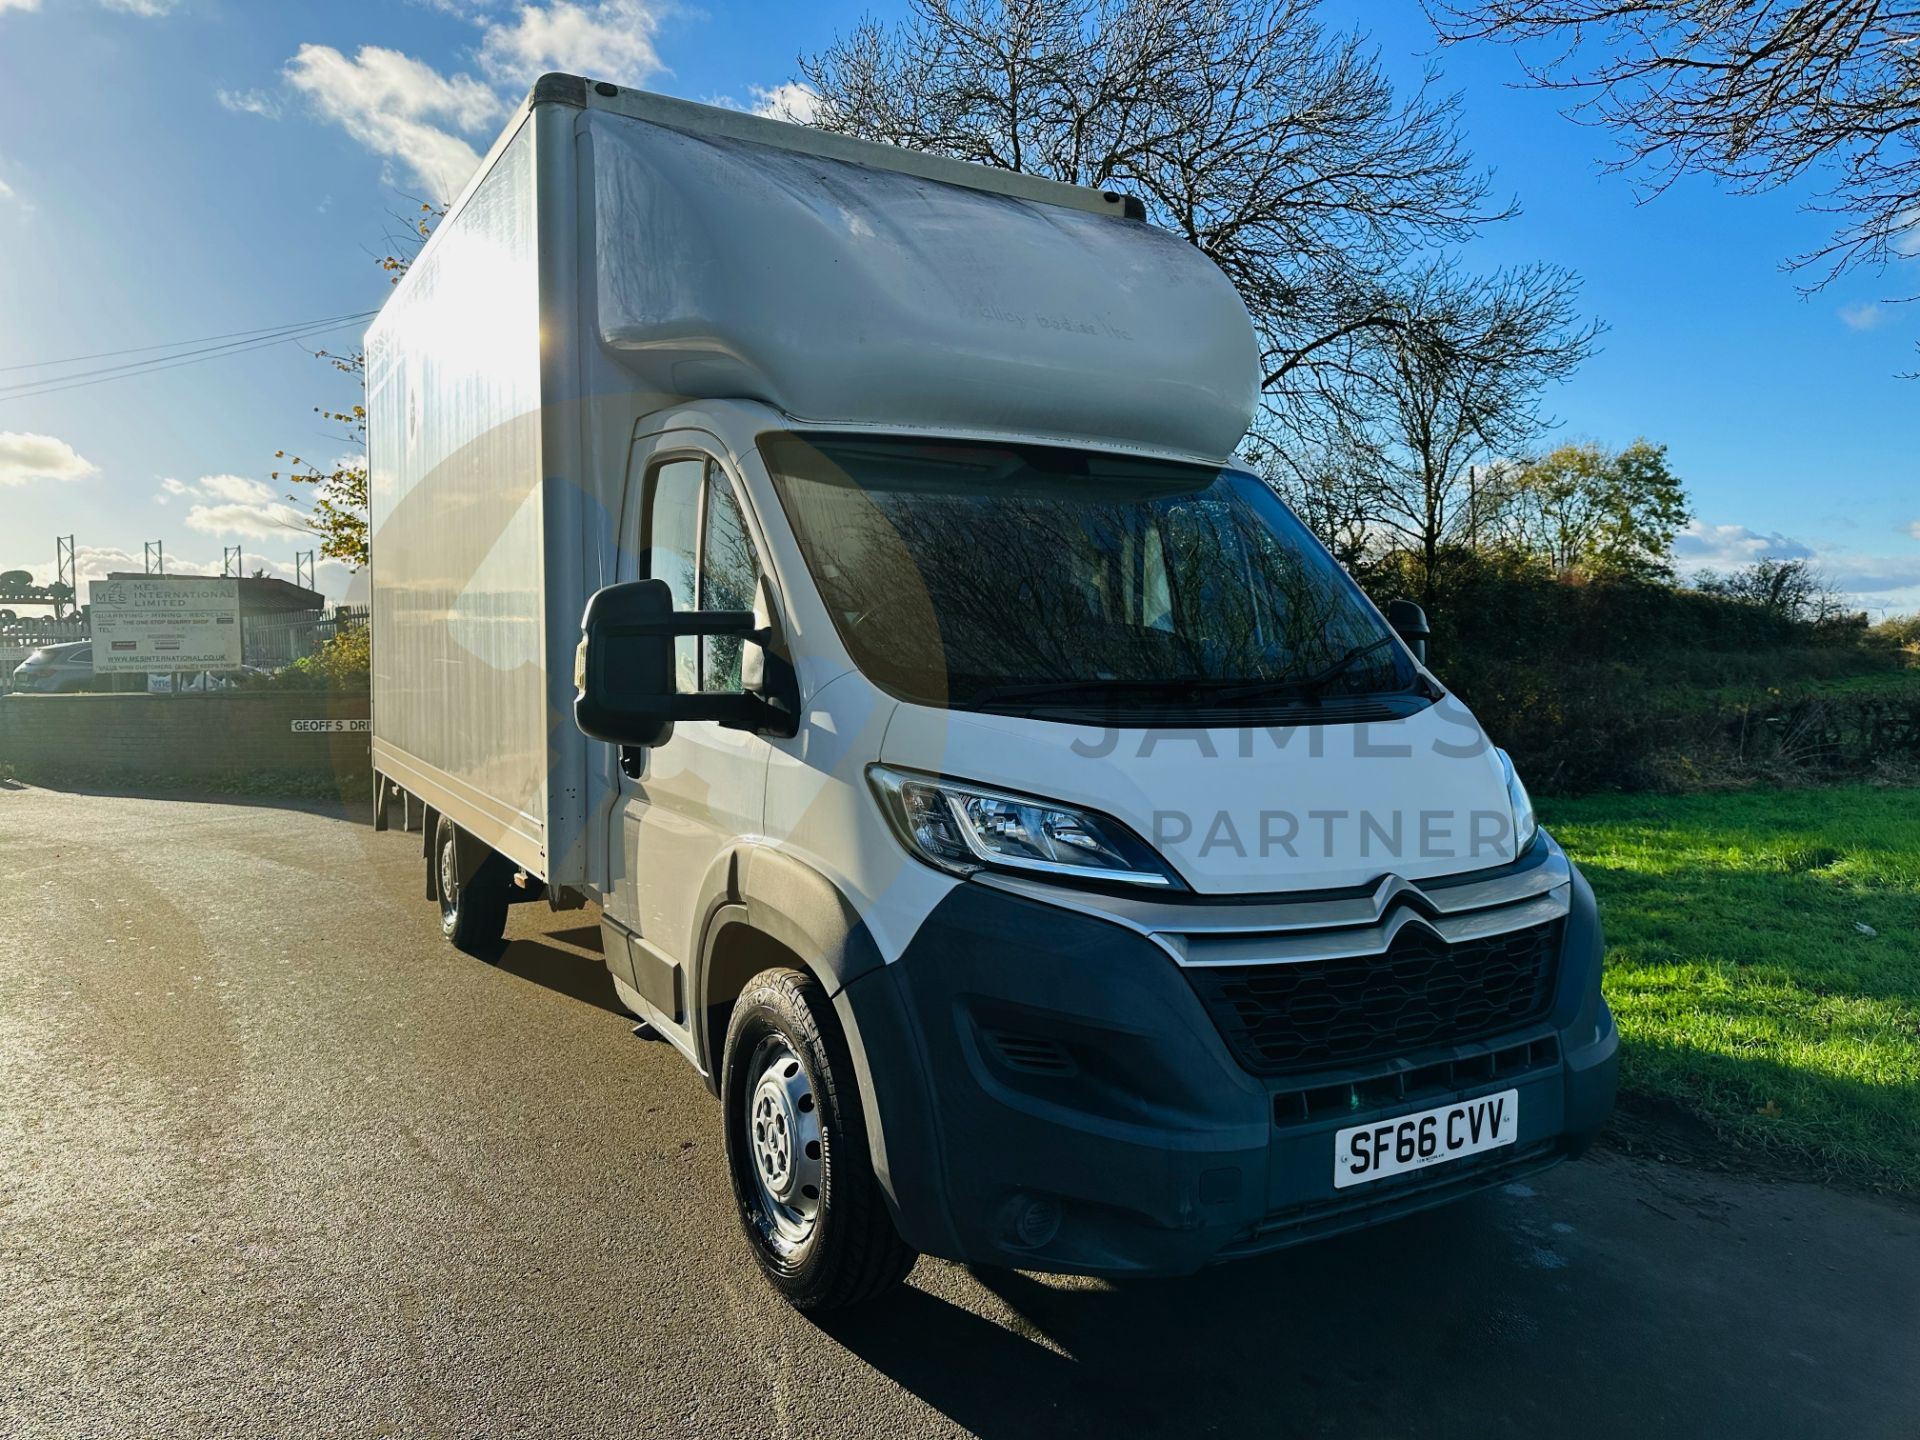 CITROEN RELAY - LUTON BOX / VAN WITH TAIL LIFT - 2017 MODEL - ONLY 39K MILES - ULEZ COMPLAINT!!! - Image 2 of 28